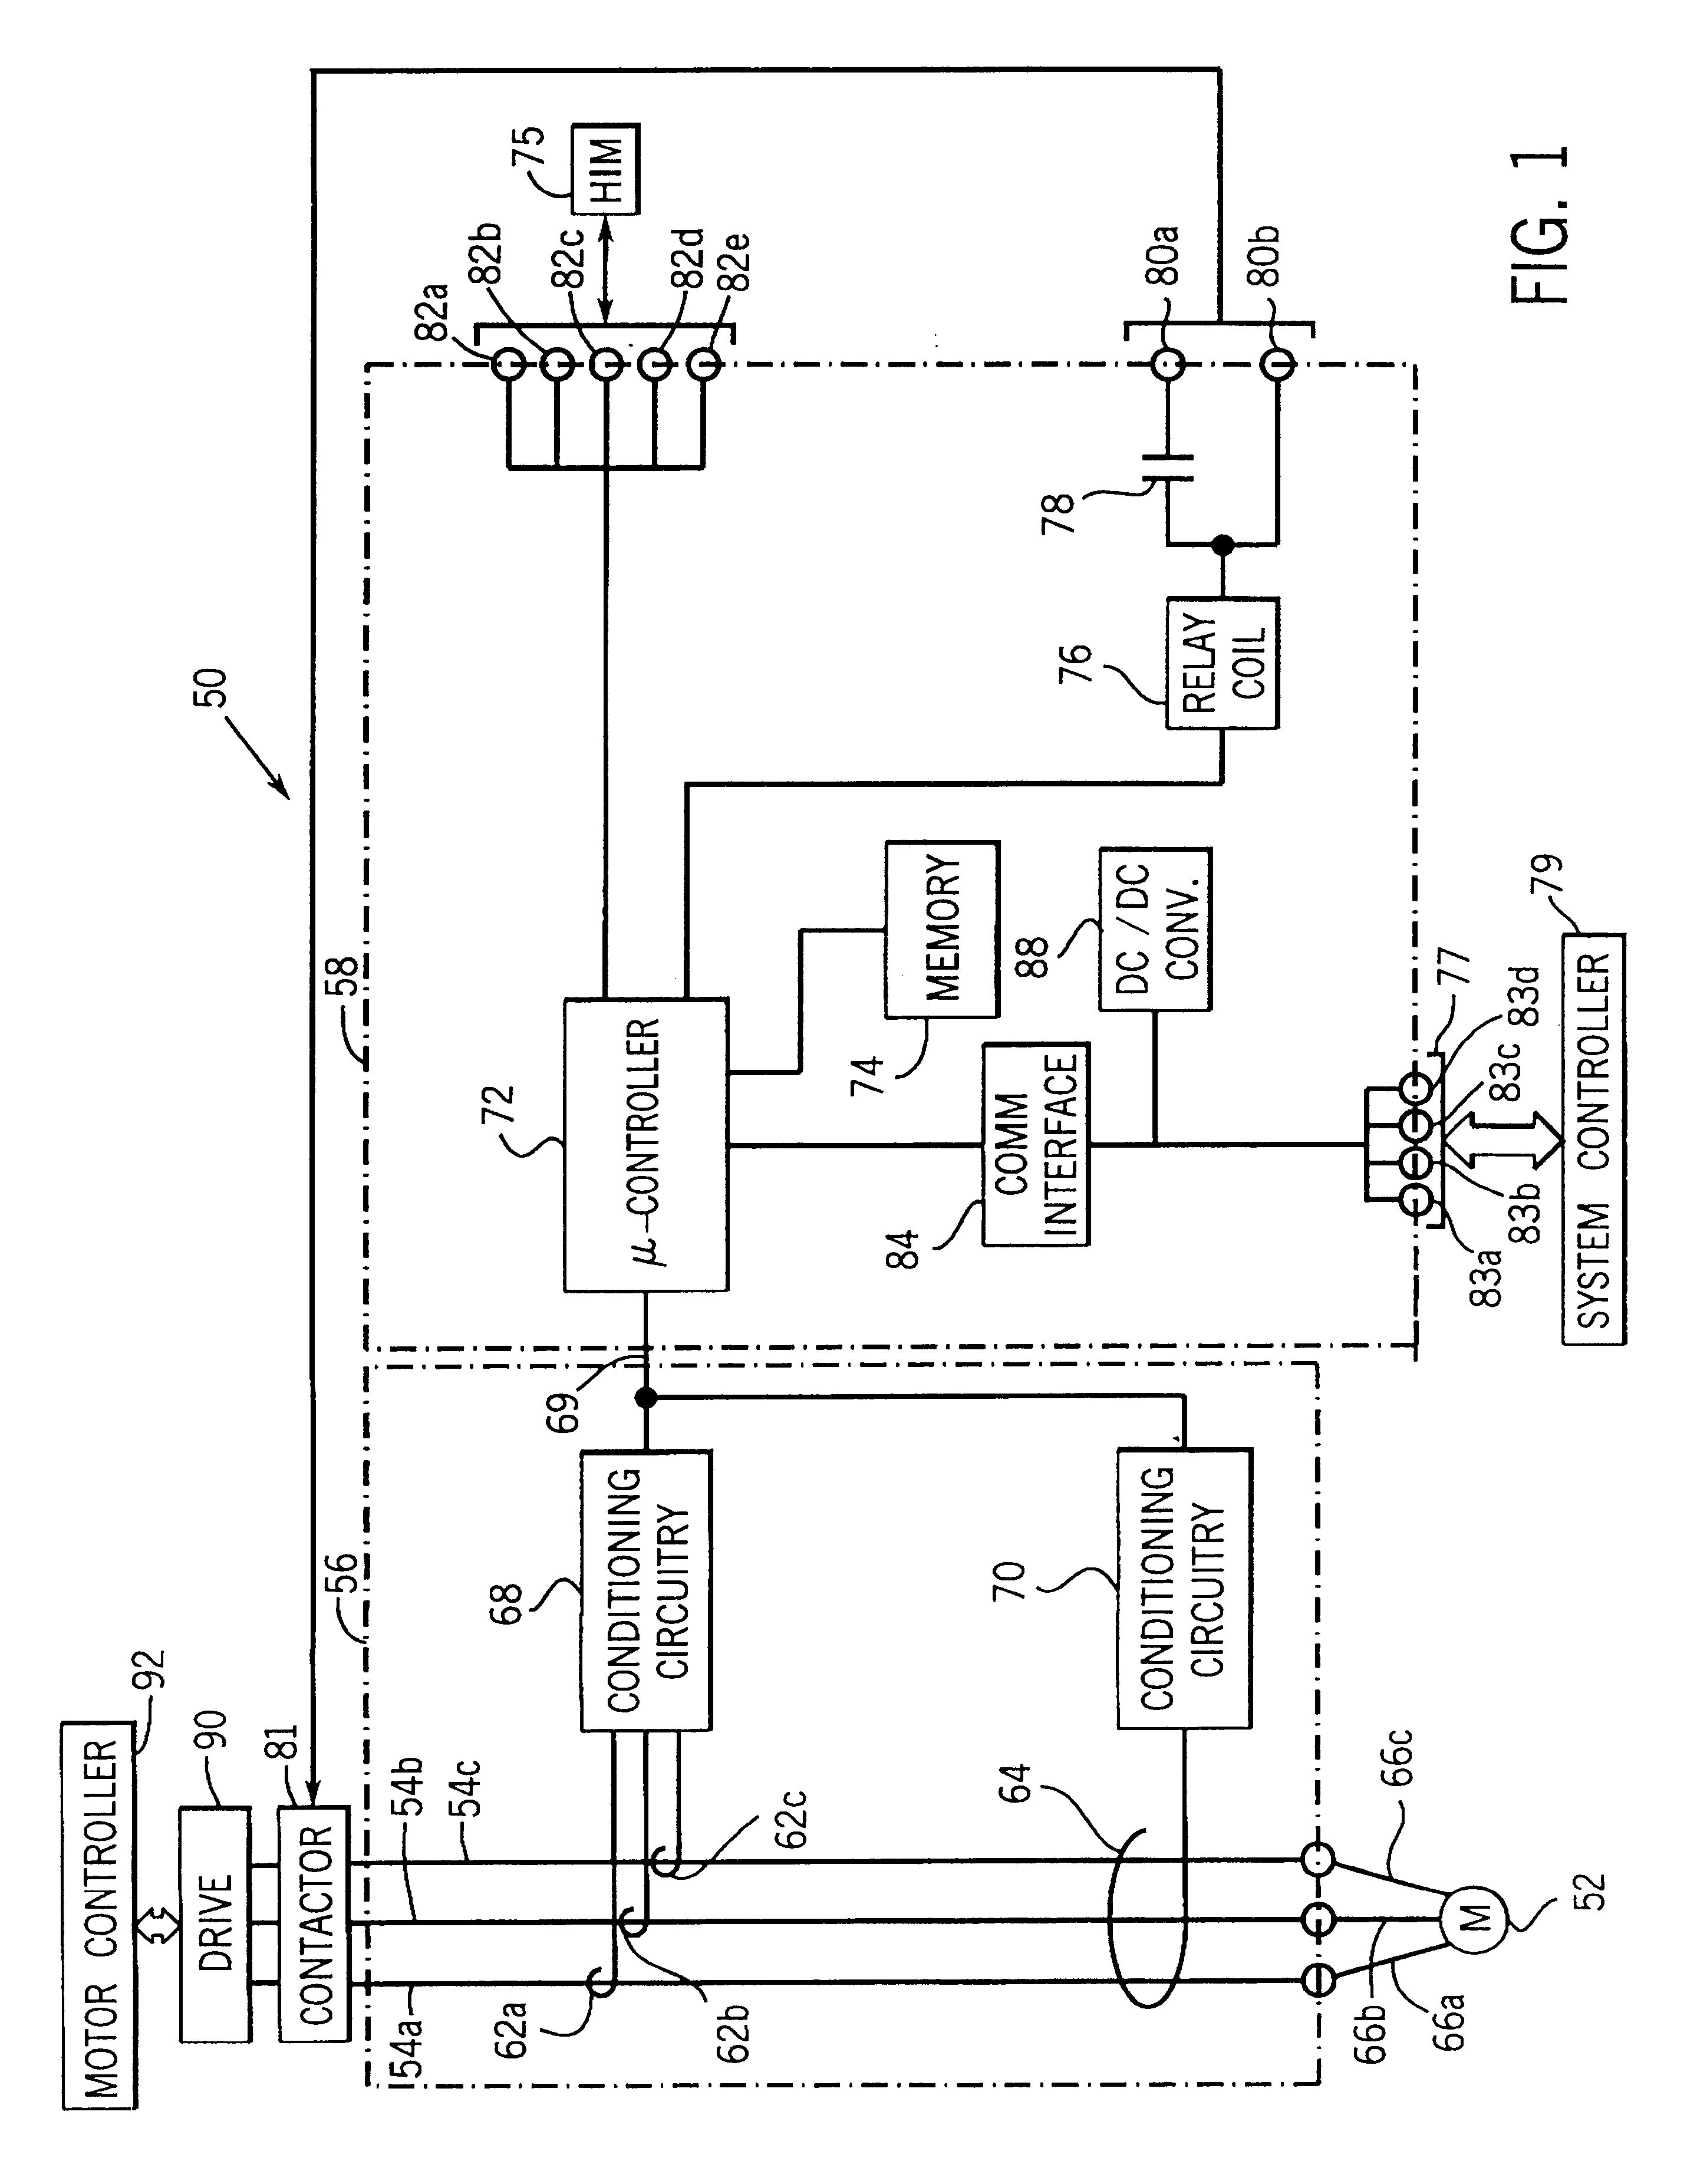 Method and apparatus for calculating RMS value